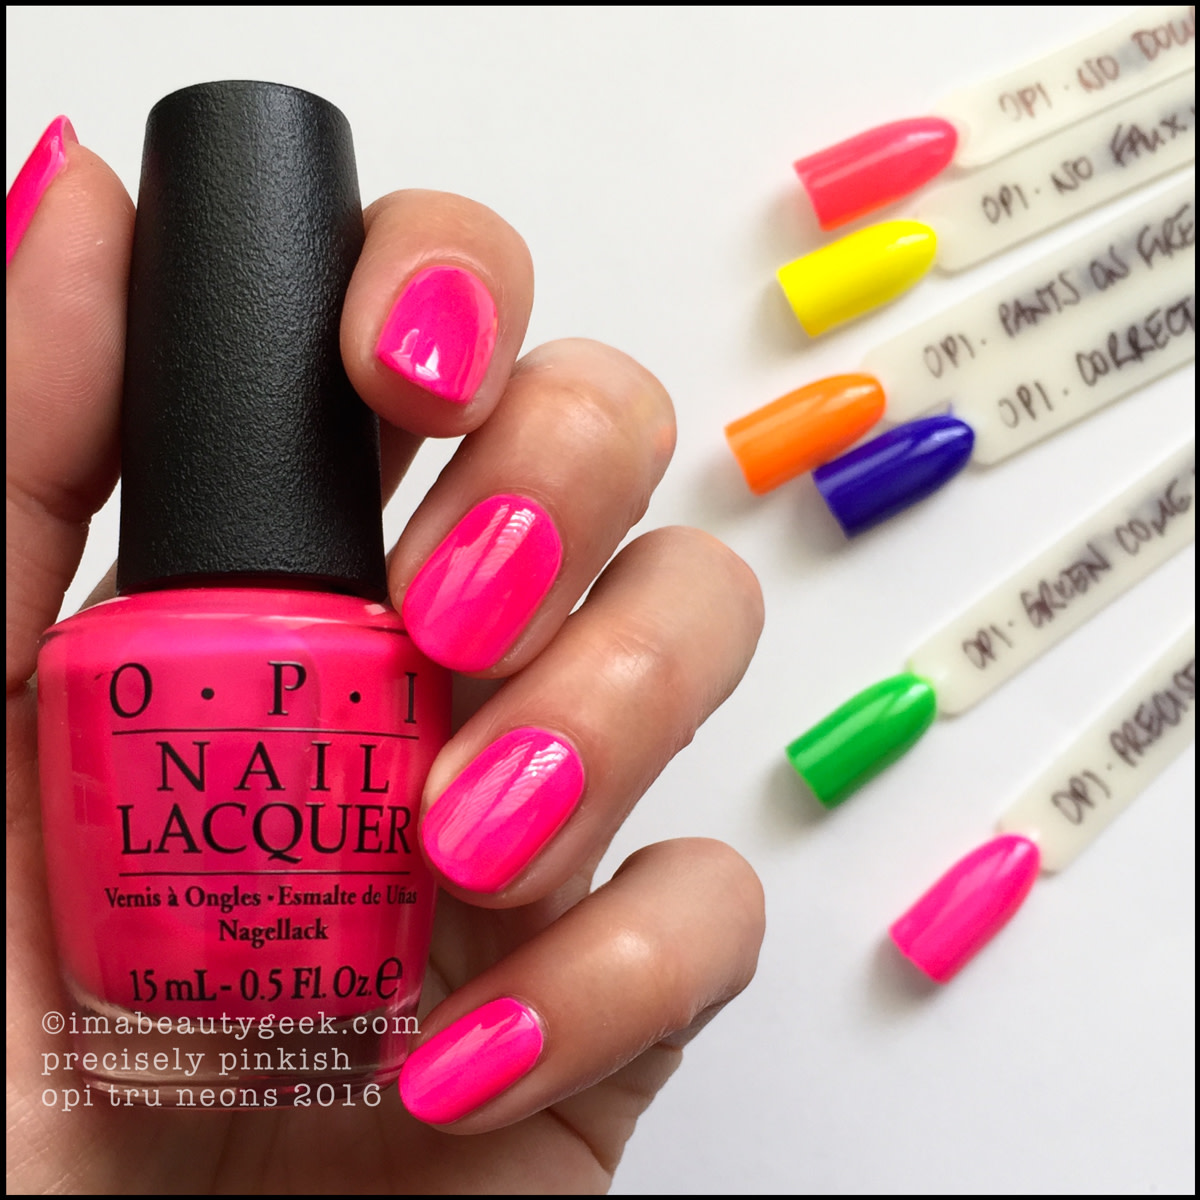 OPI Precisely Pinkish_OPI Tru Neons 2016 Swatches Review